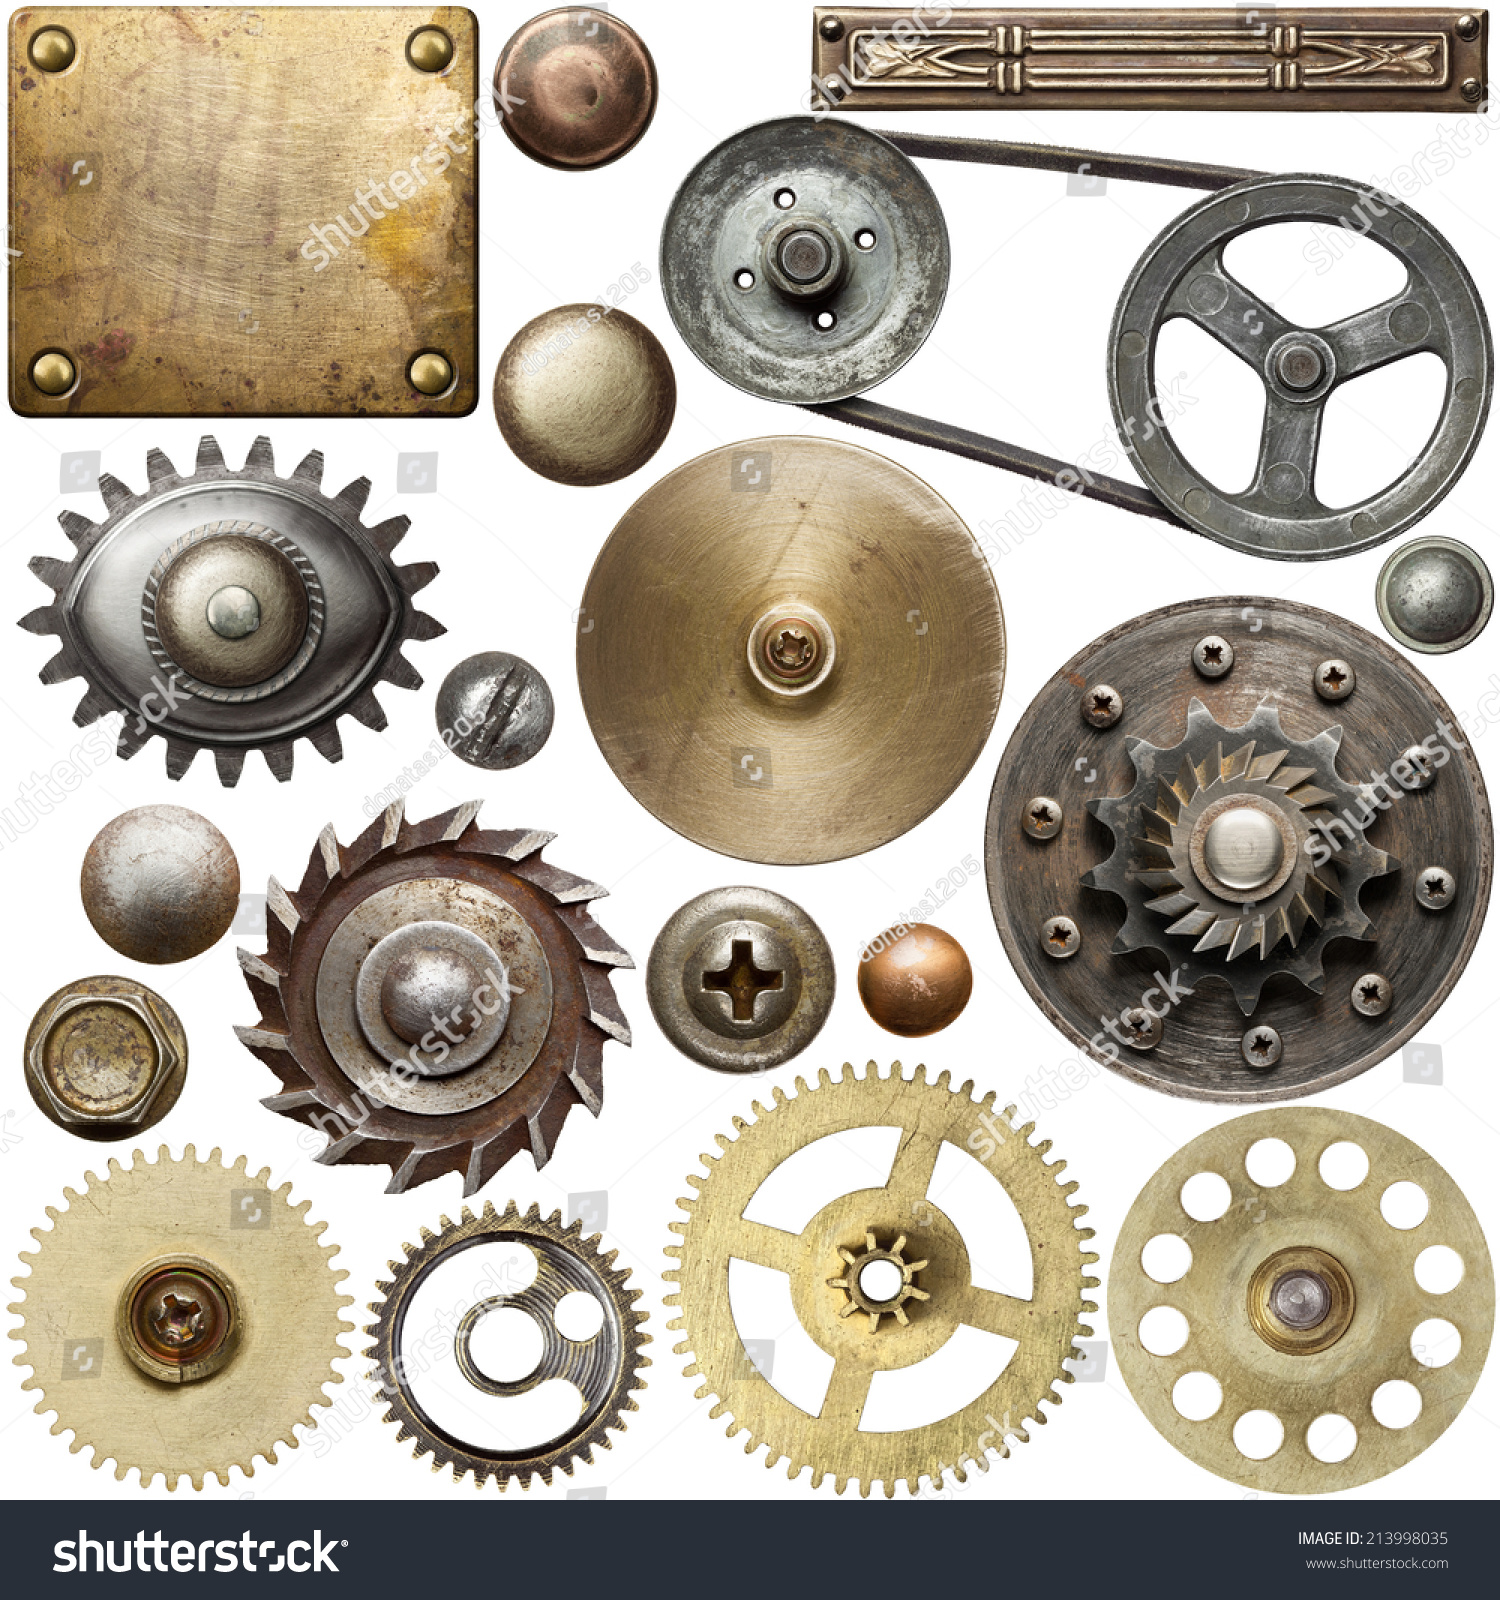 Screw heads, gears, textures and other metal details. #213998035